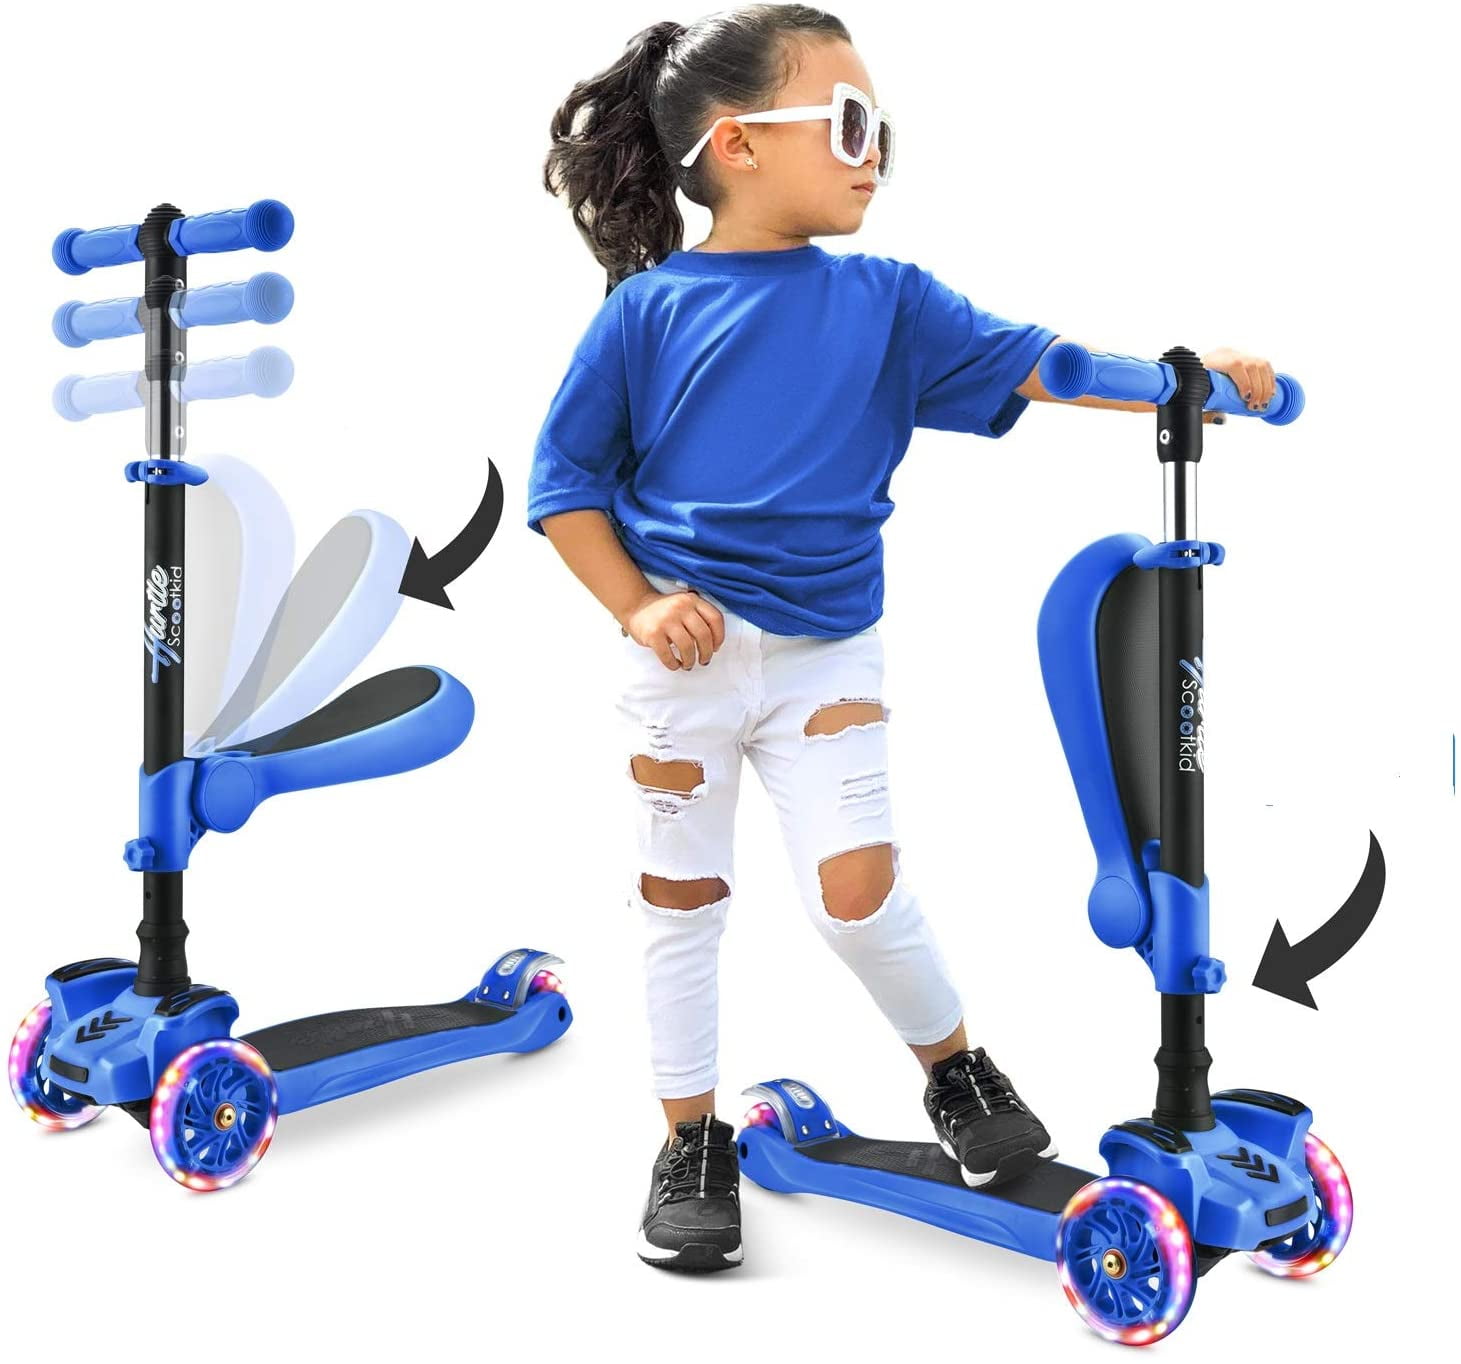 Kick Scooter for Kids Toddlers 3 Wheel Scooter for Boys Girls Ages 2-5 Years Old 